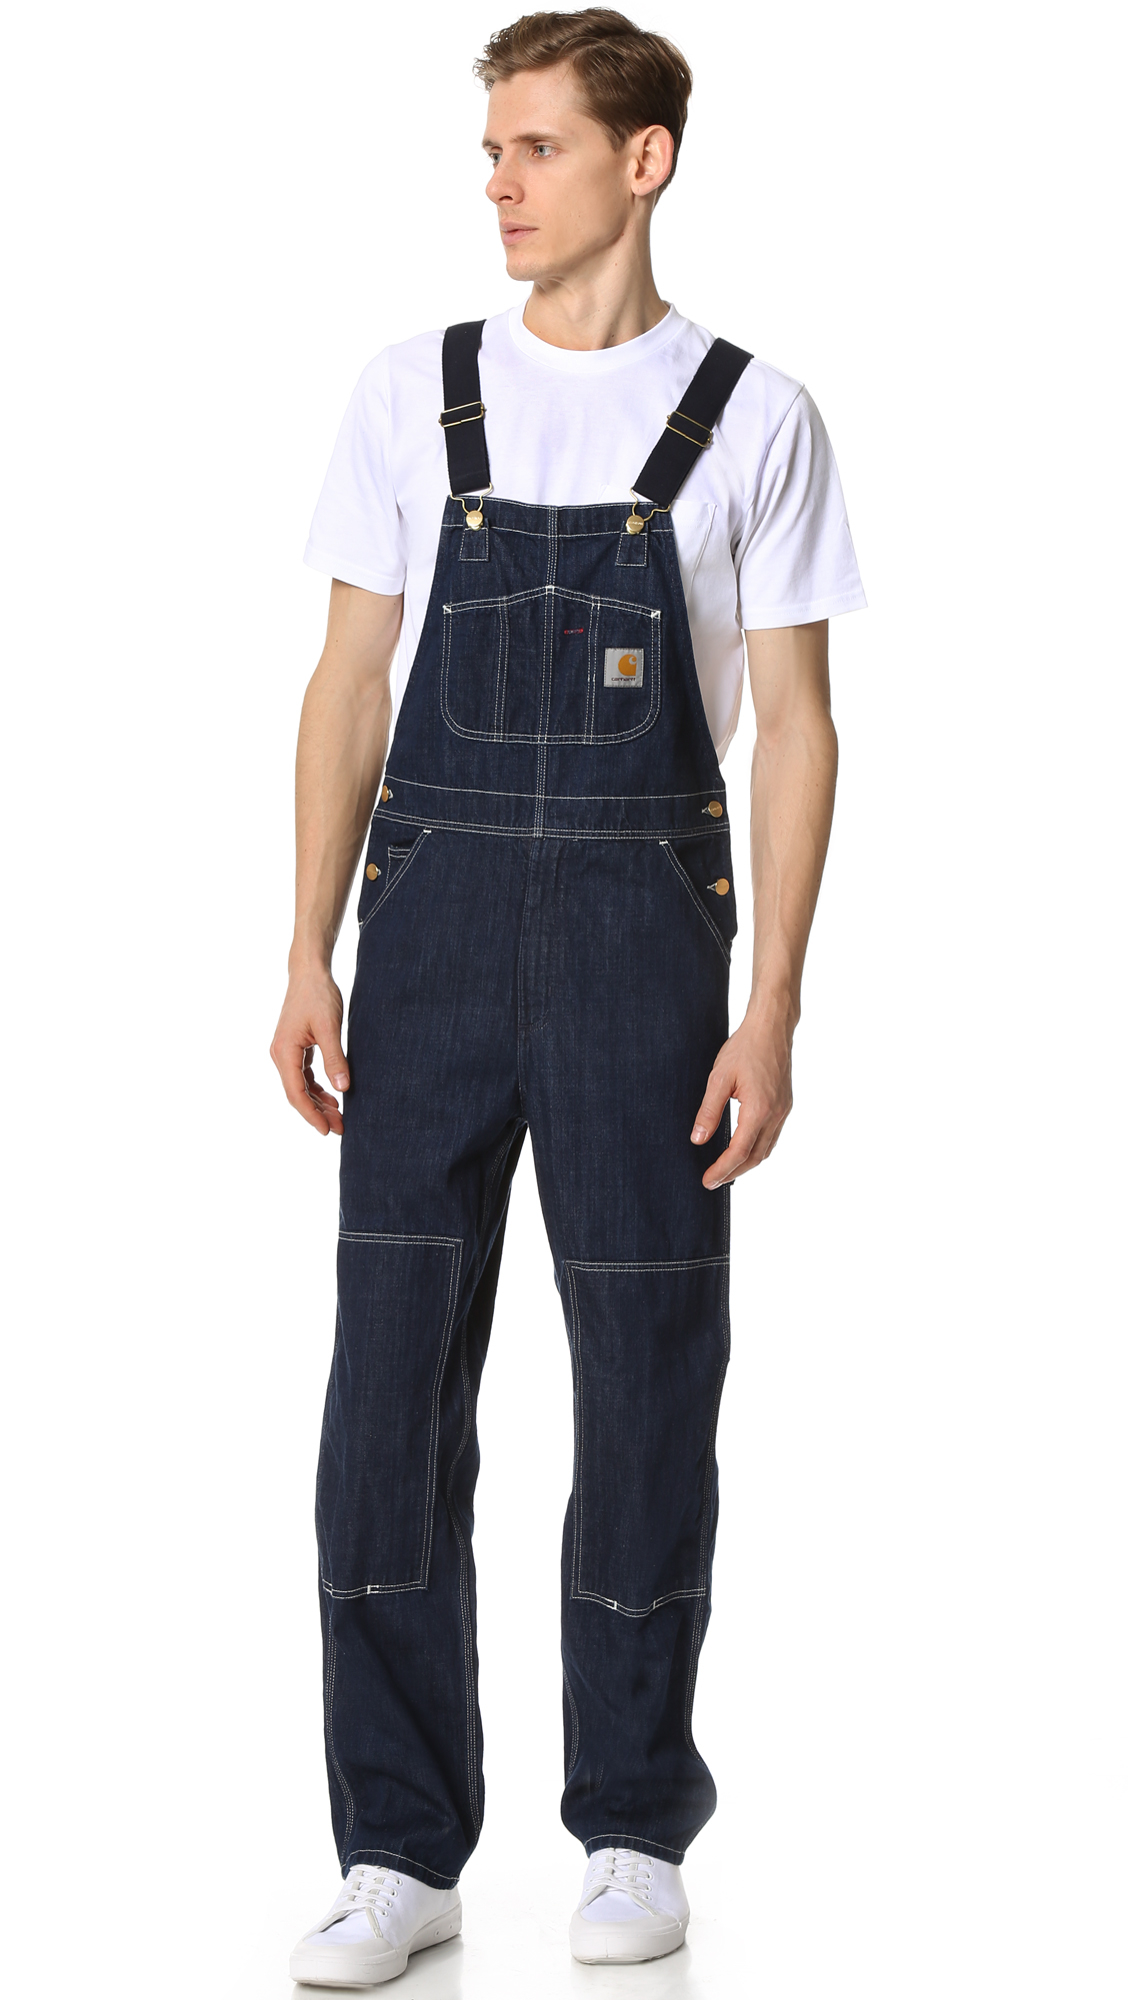 Carhartt WIP Bib Overall Jeans - buy at Blue Tomato